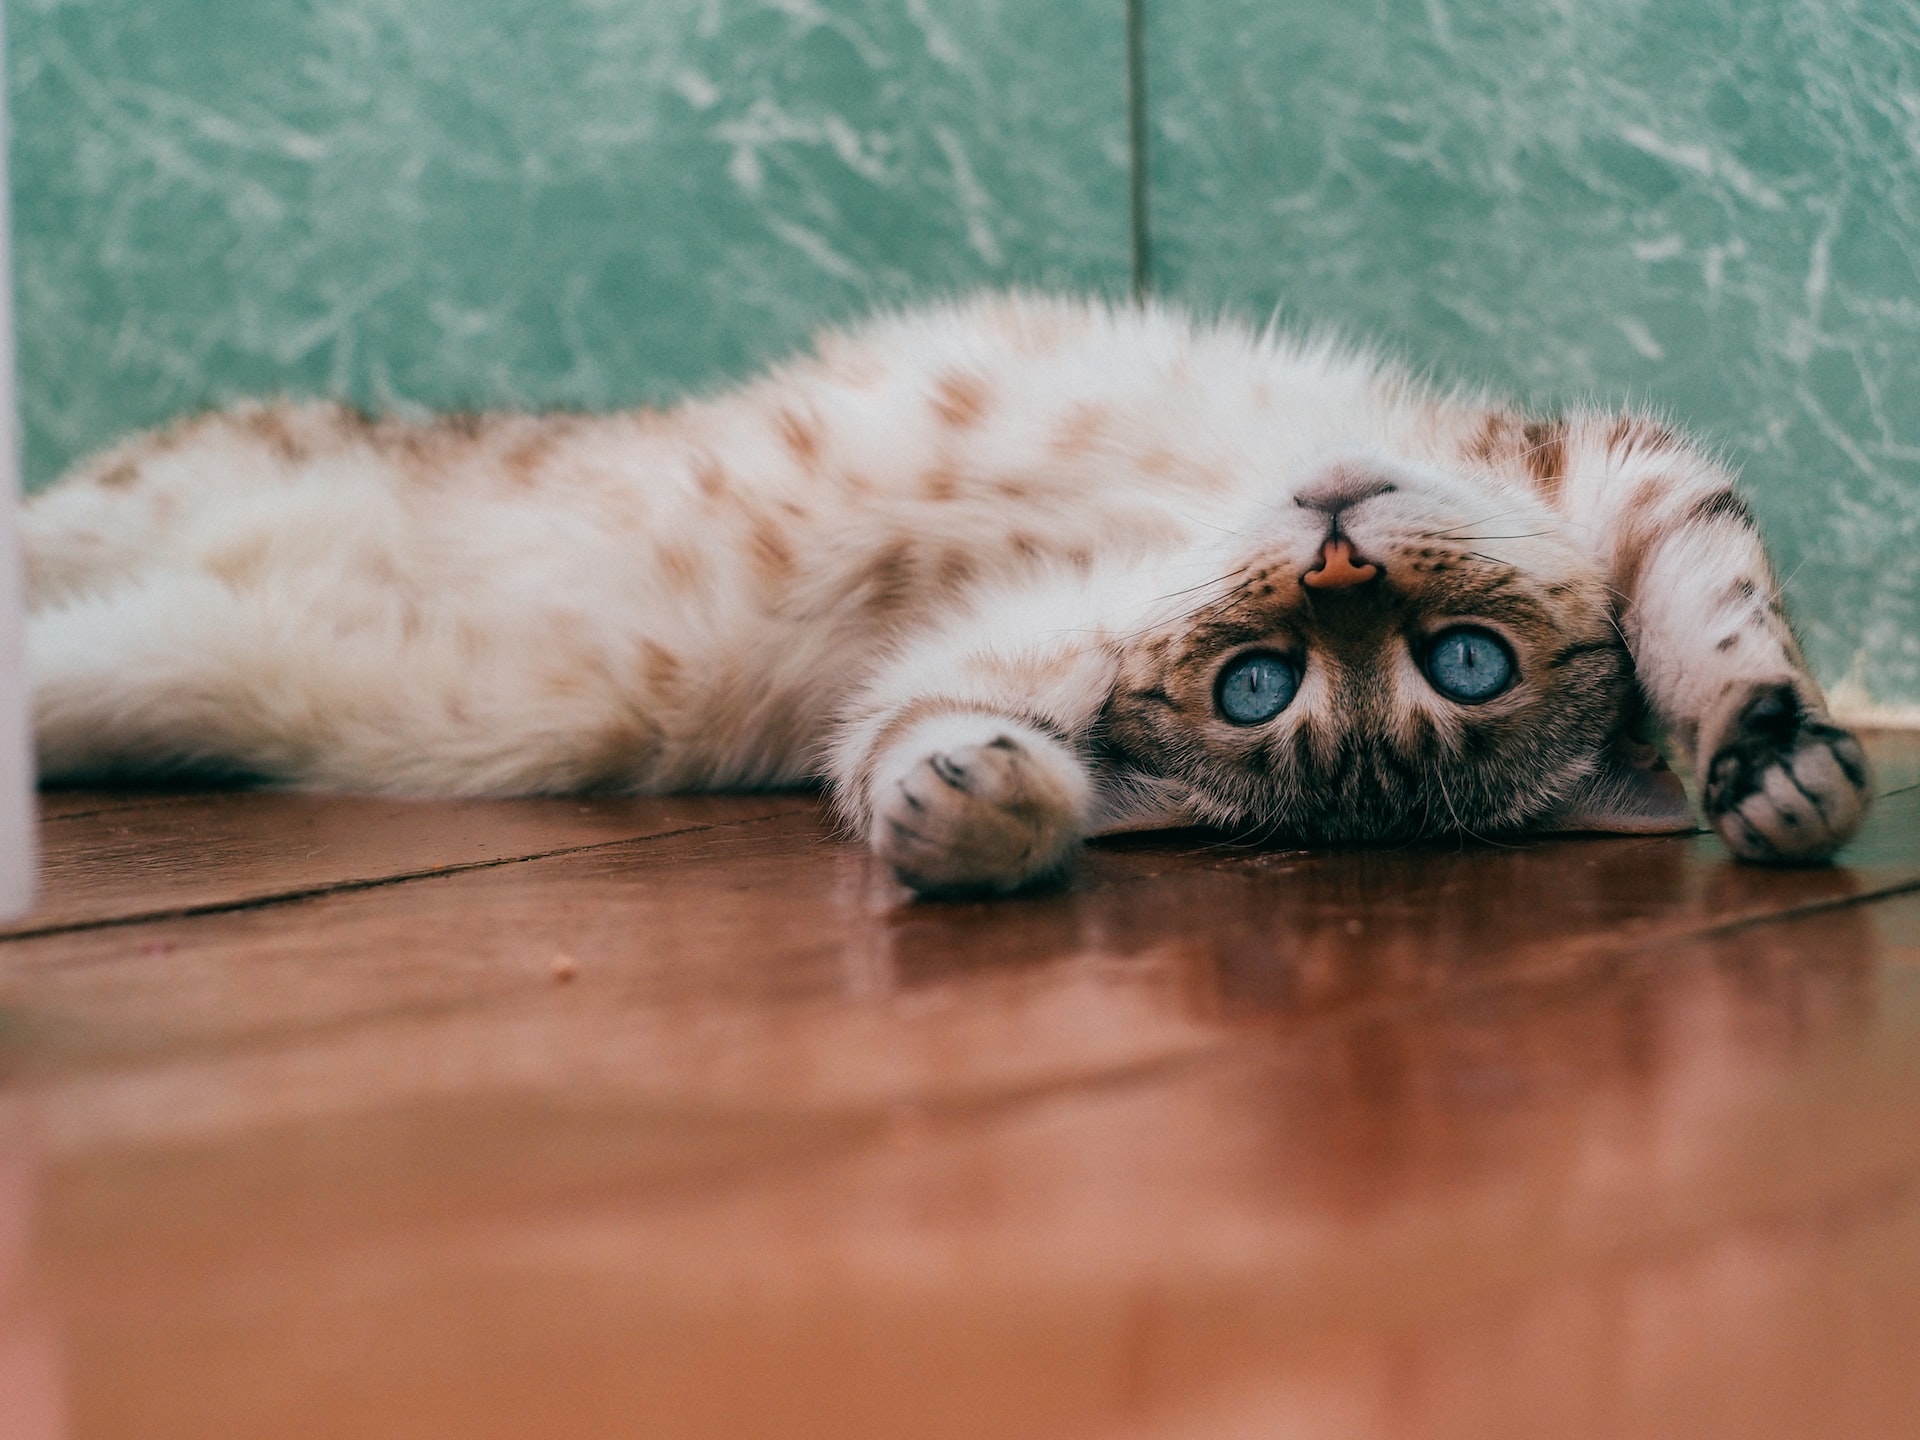 20 Fun and Surprising Facts About Cats